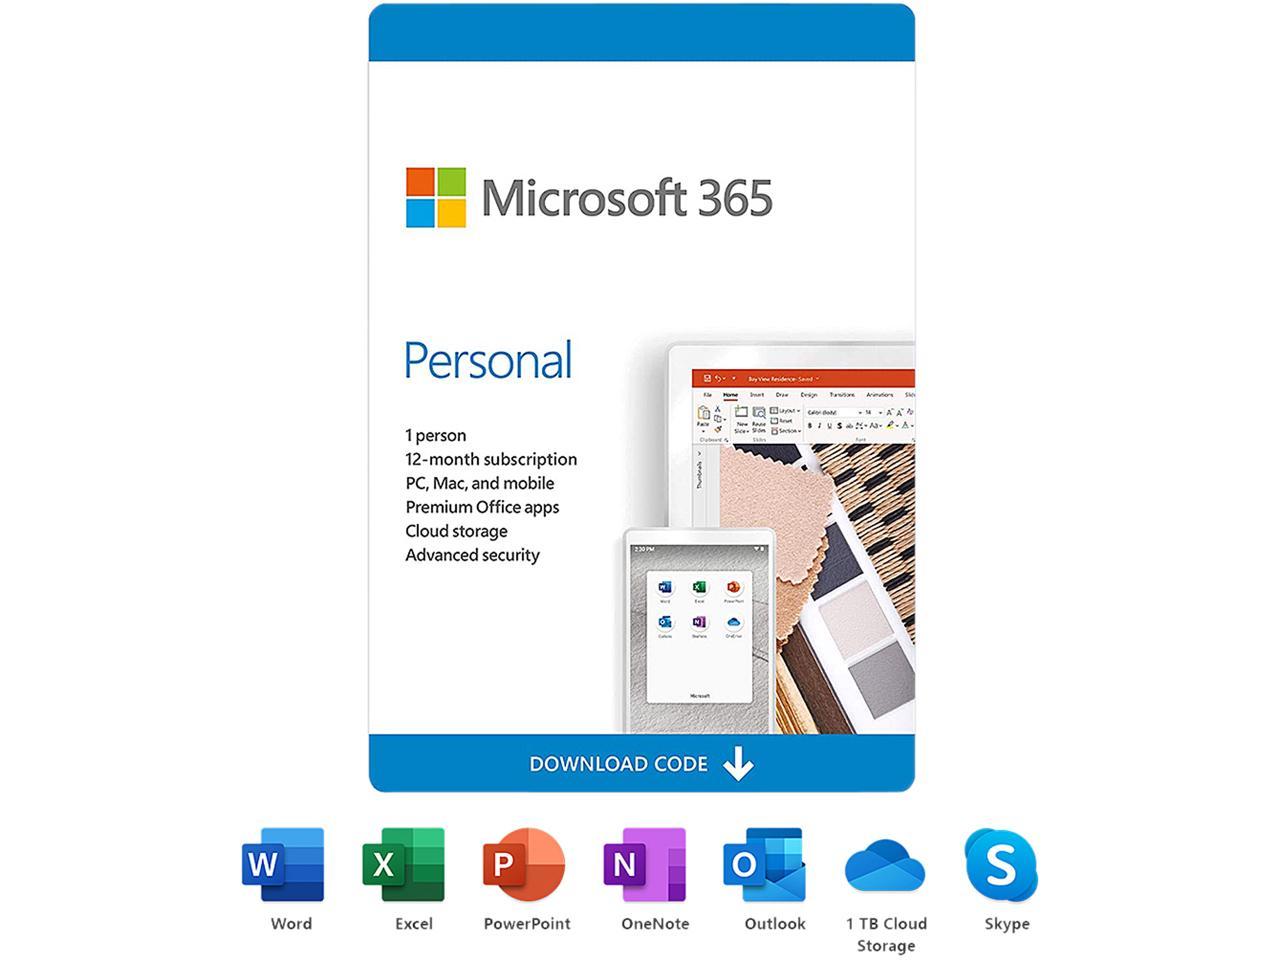 office 365 for both mac and pc